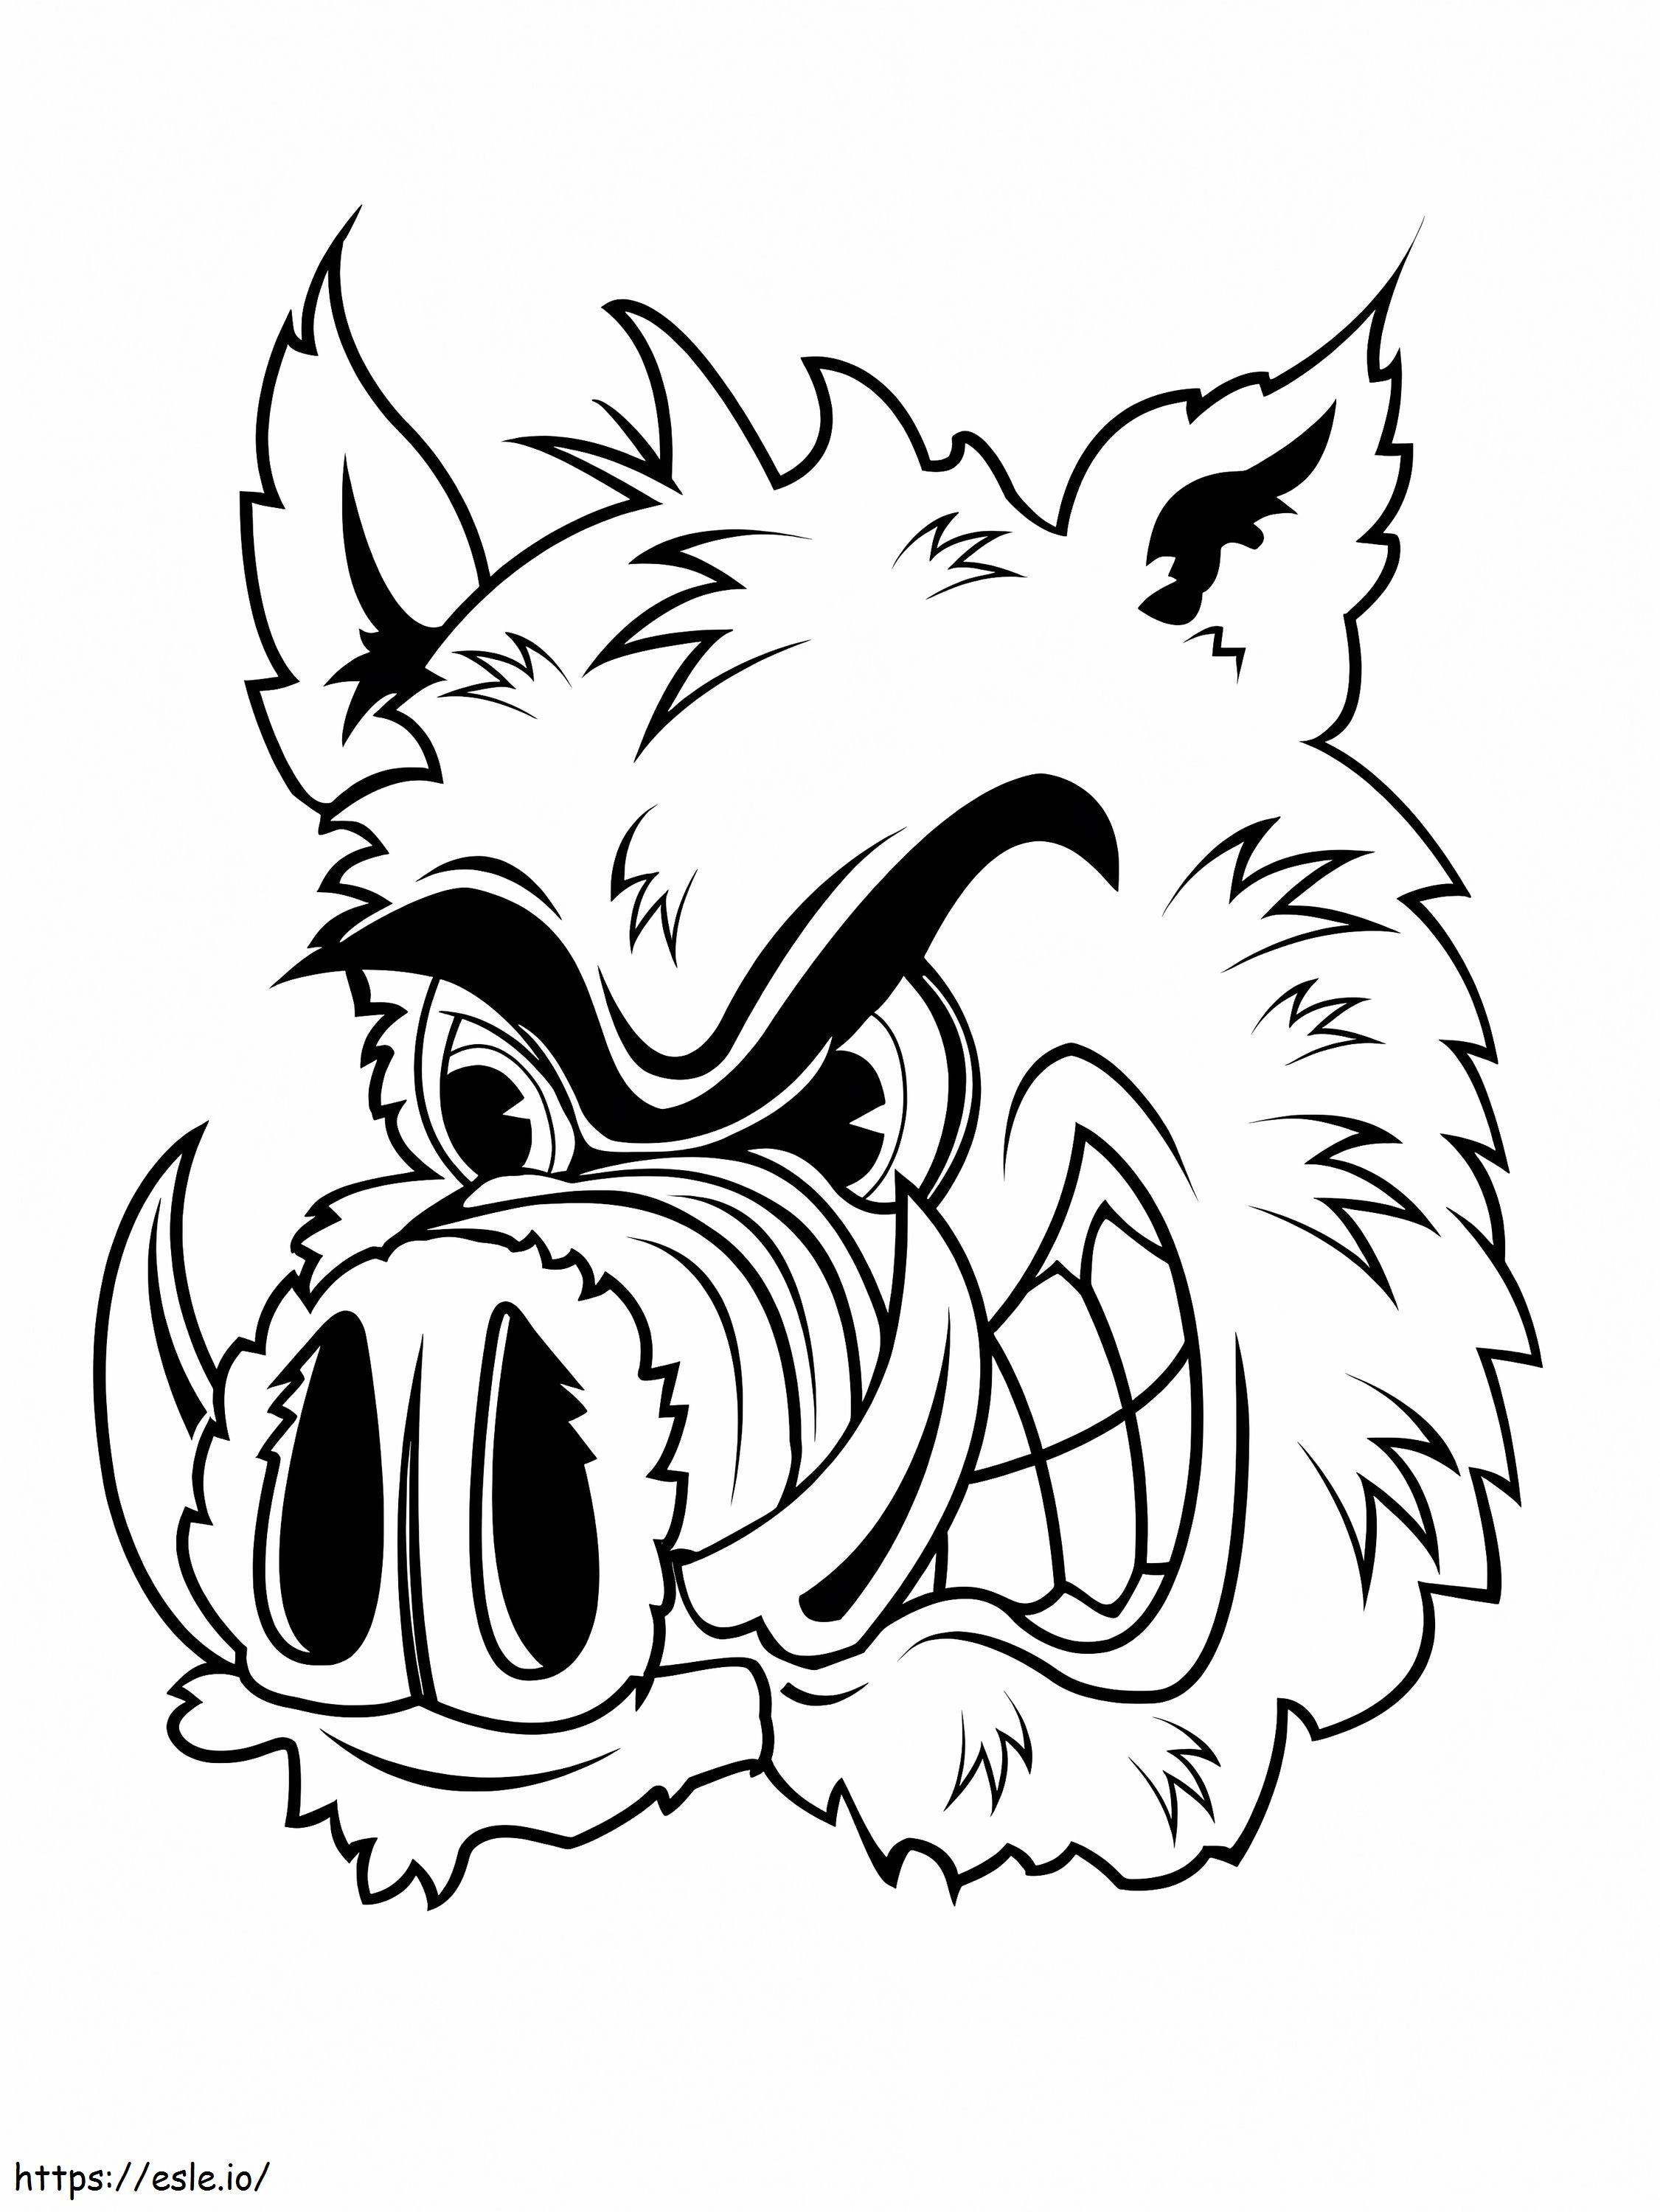 Angry Boar coloring page